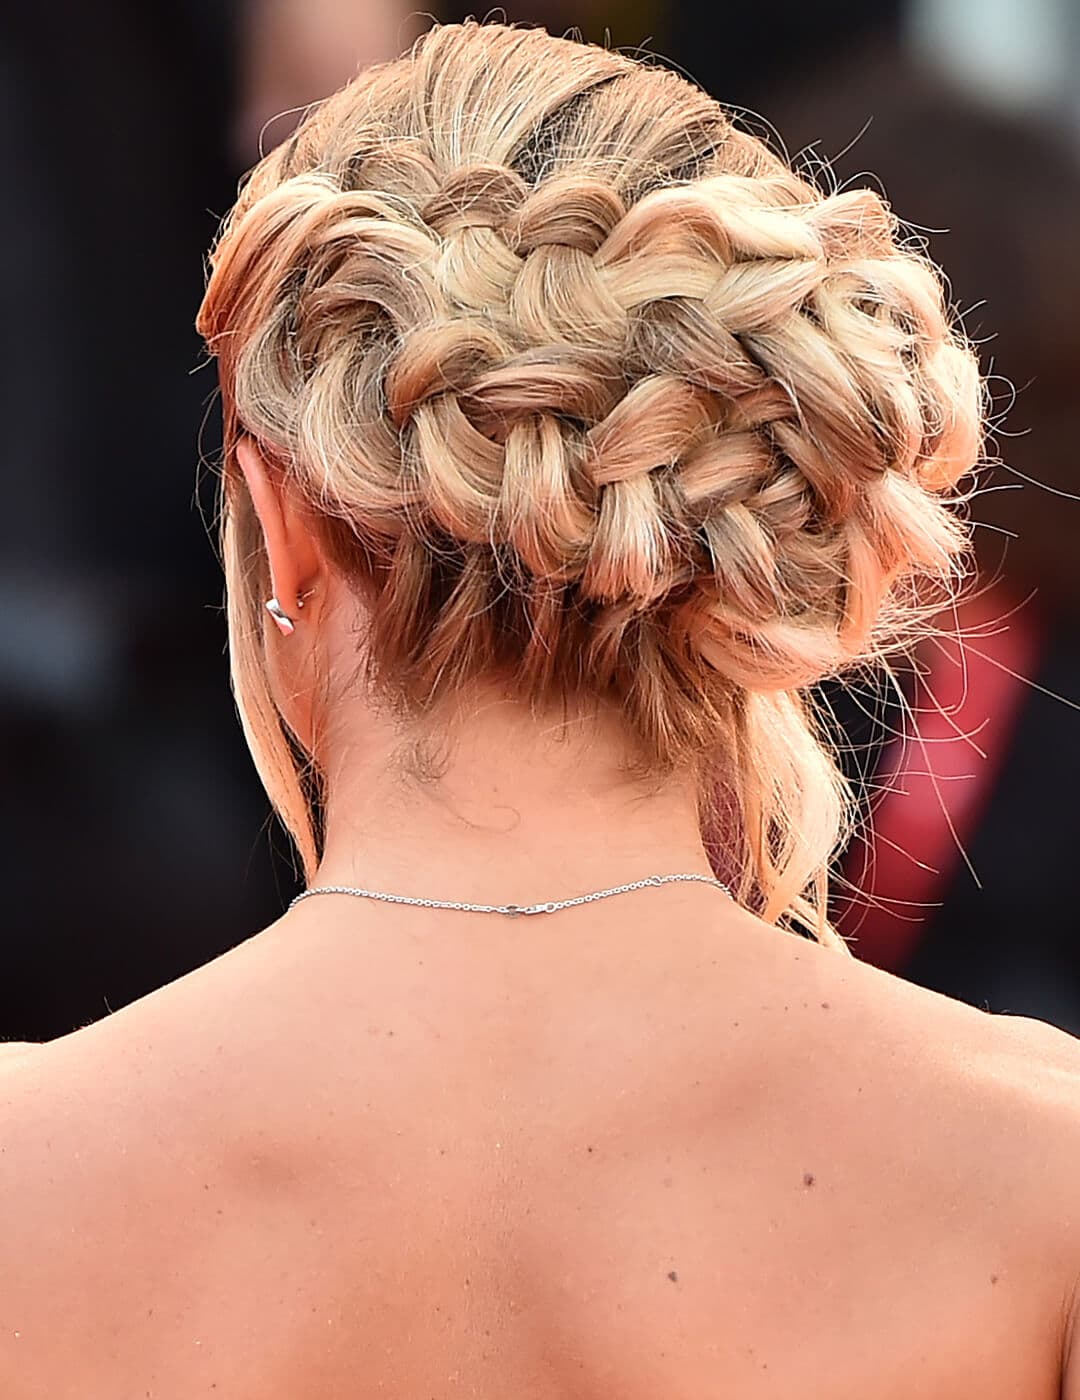 Anna Penello facing back showing off her braided updo hairstyle